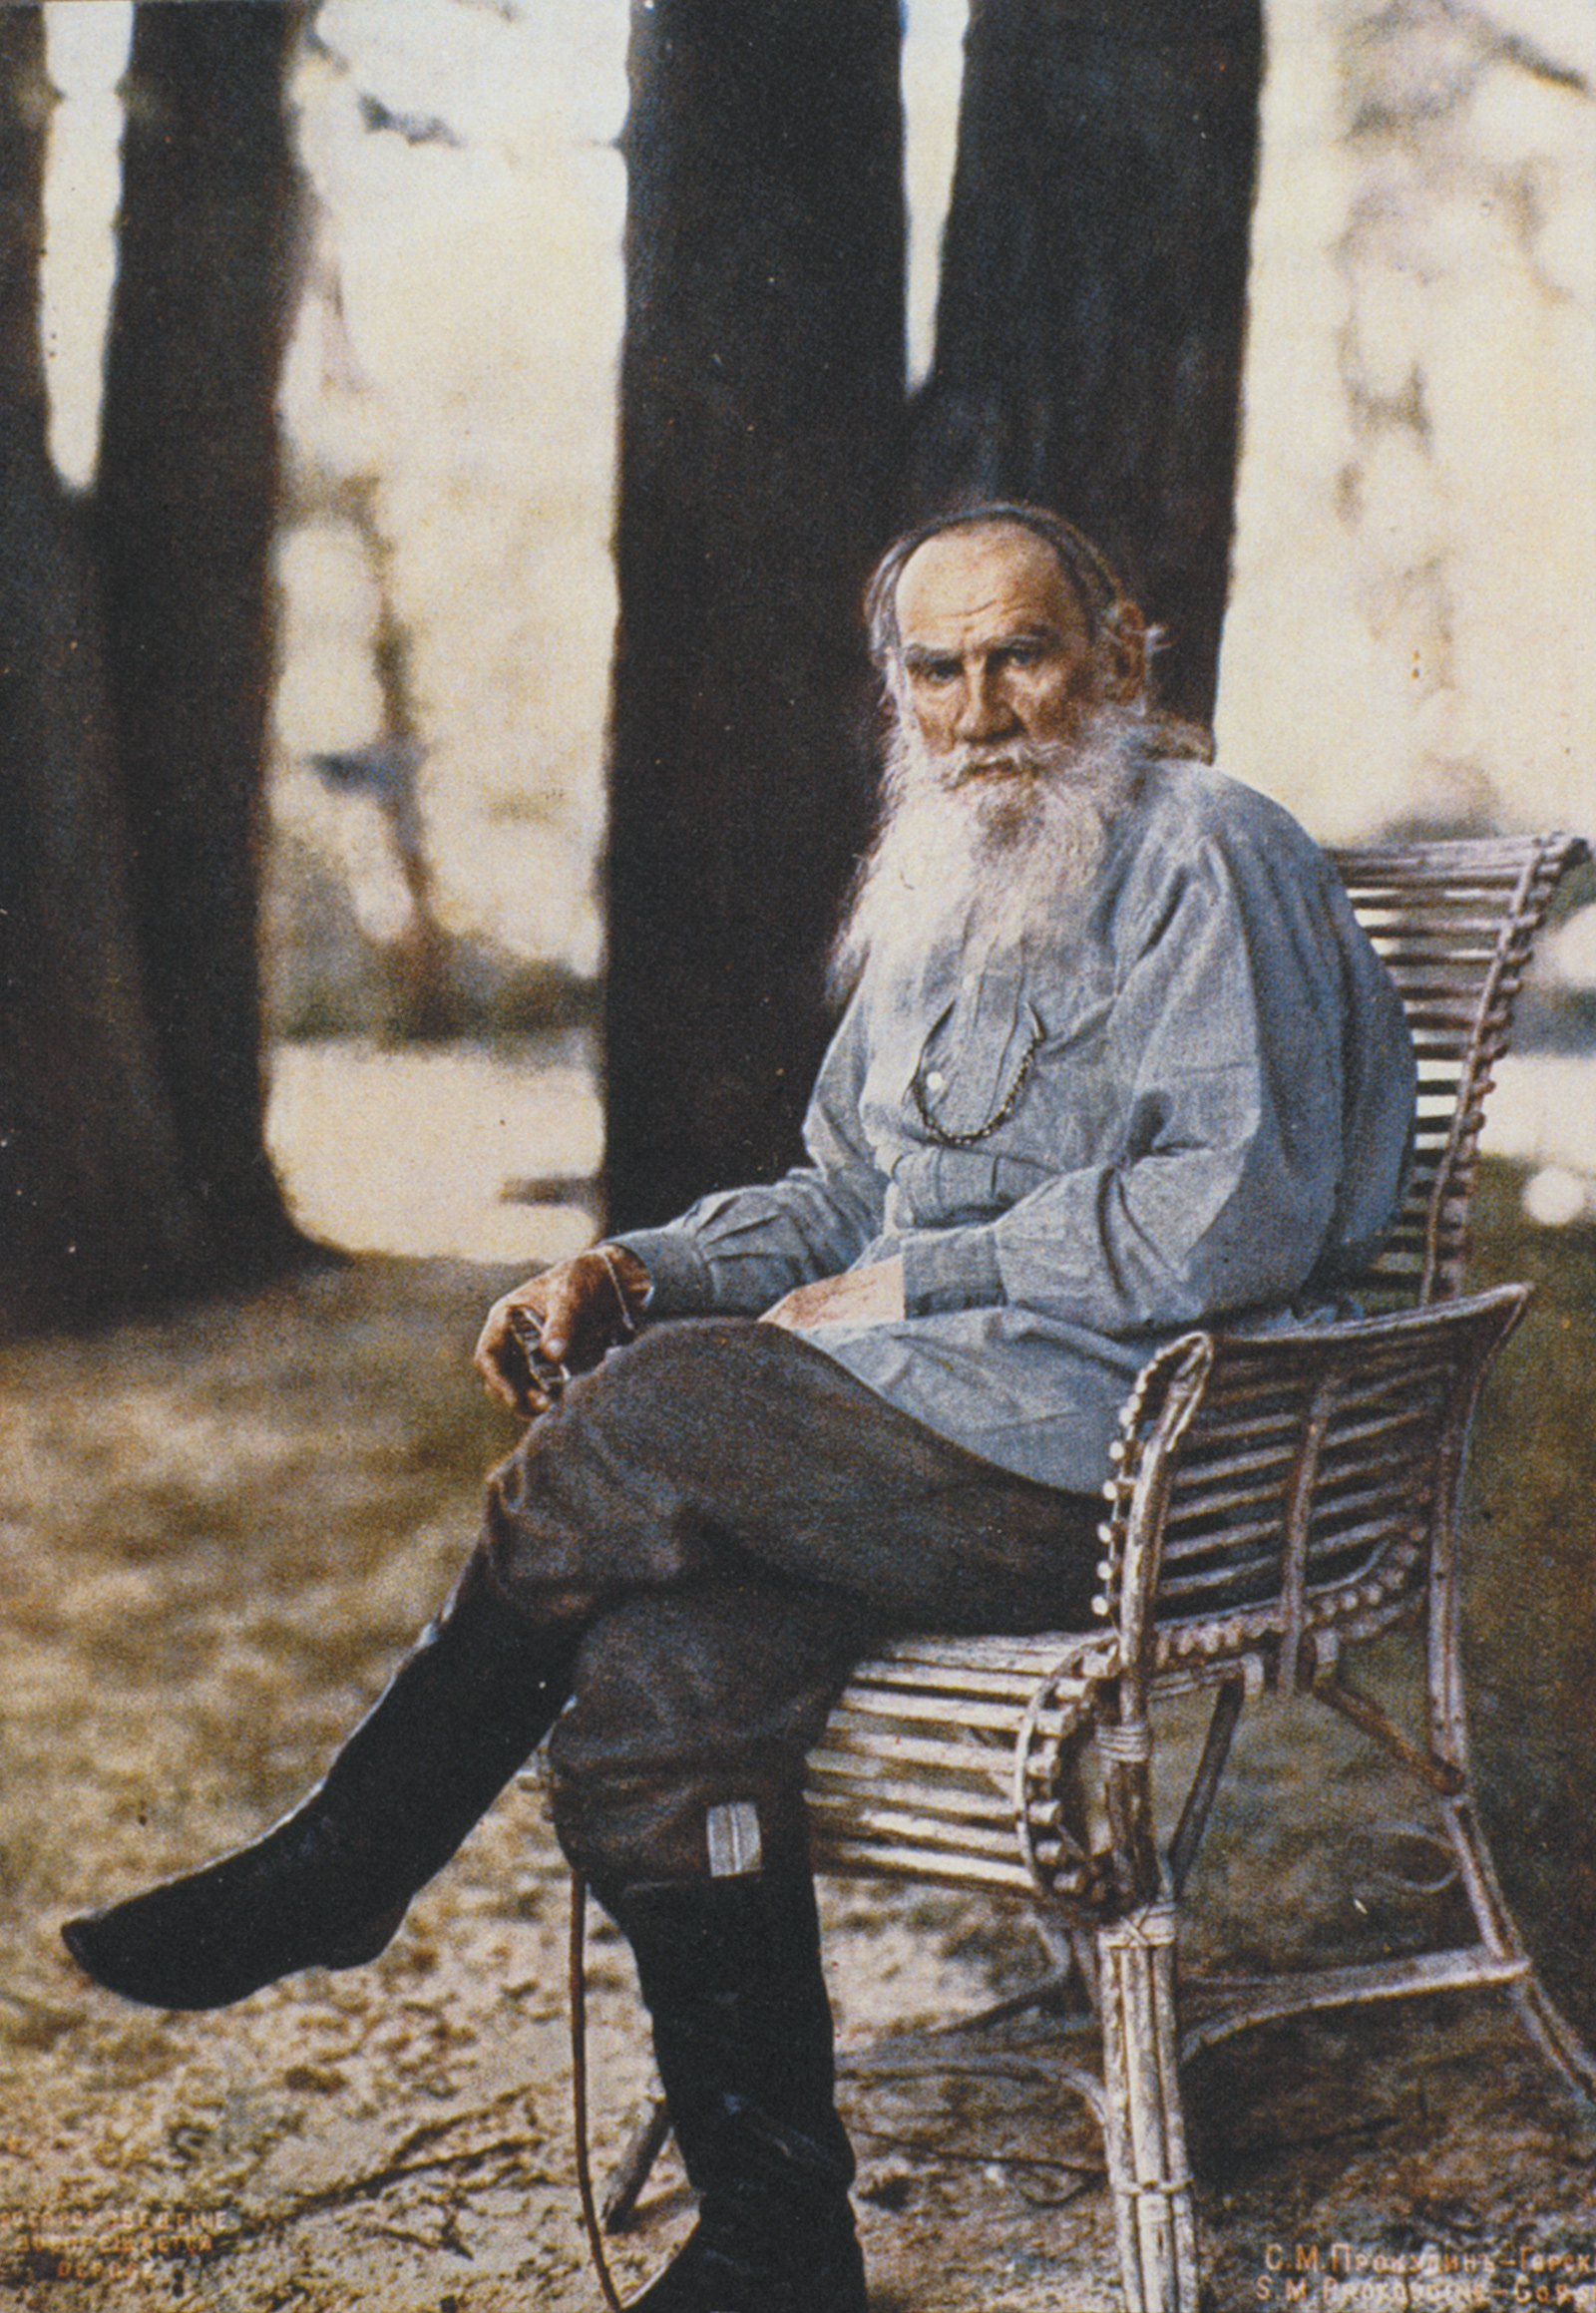 Leo Tolstoy at Yasnaya Polyana, the family estate where he wrote Anna Karenina, about 125 miles south of Moscow, May 1908